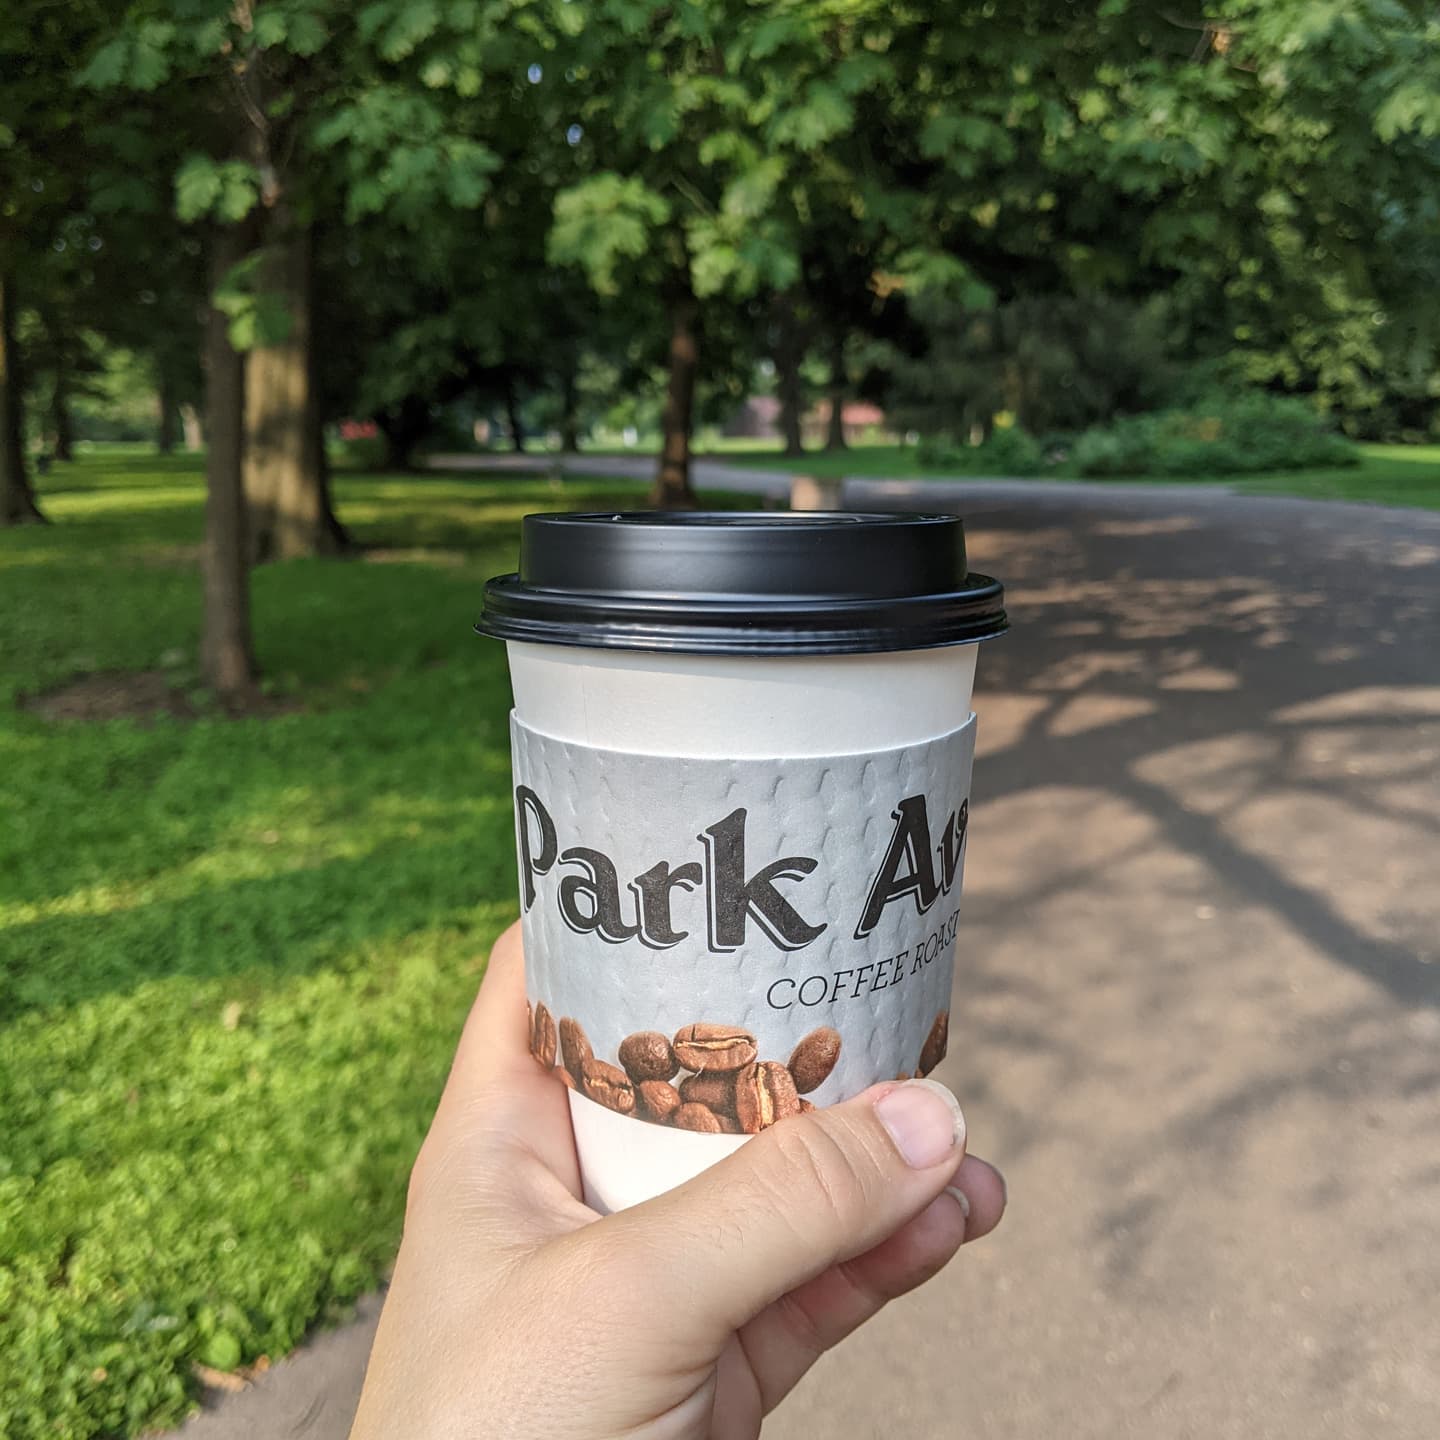 It's good to be home. With #parkavenuecoffee in the park. Lovely.